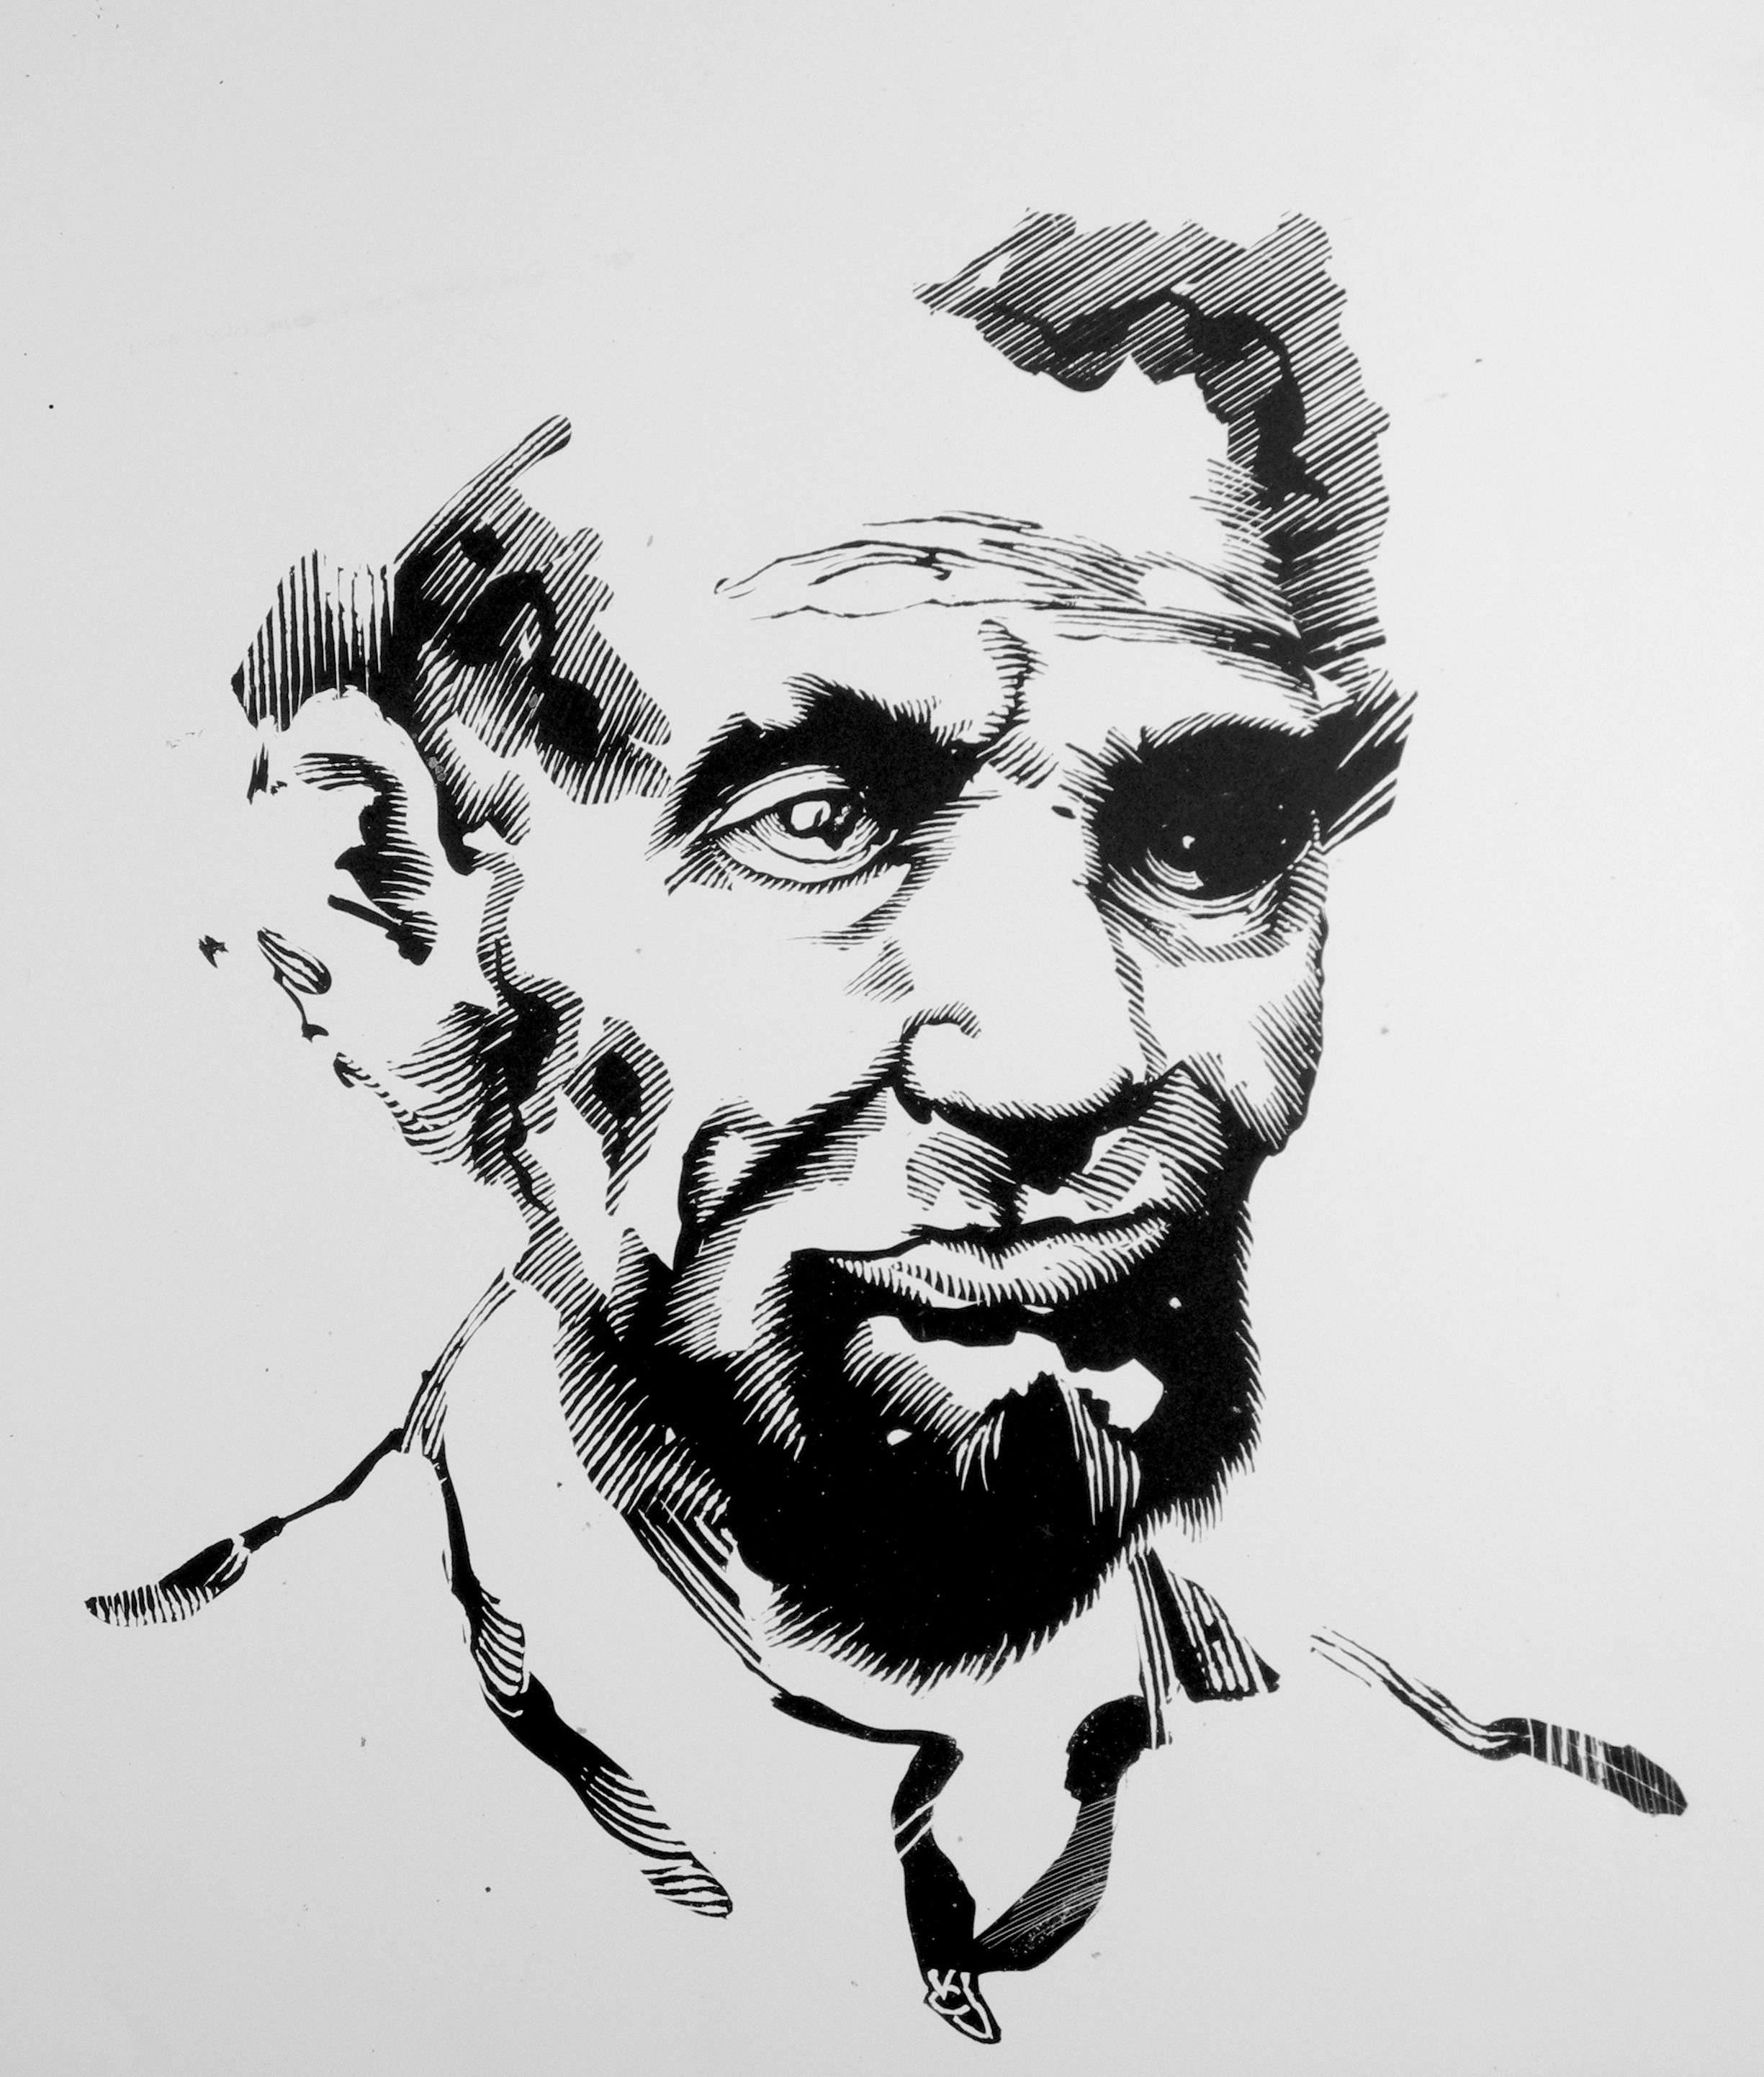 "Lincoln" by Vernon Courtlandt Johnson. © 1981 VCJ. All rights reserved.